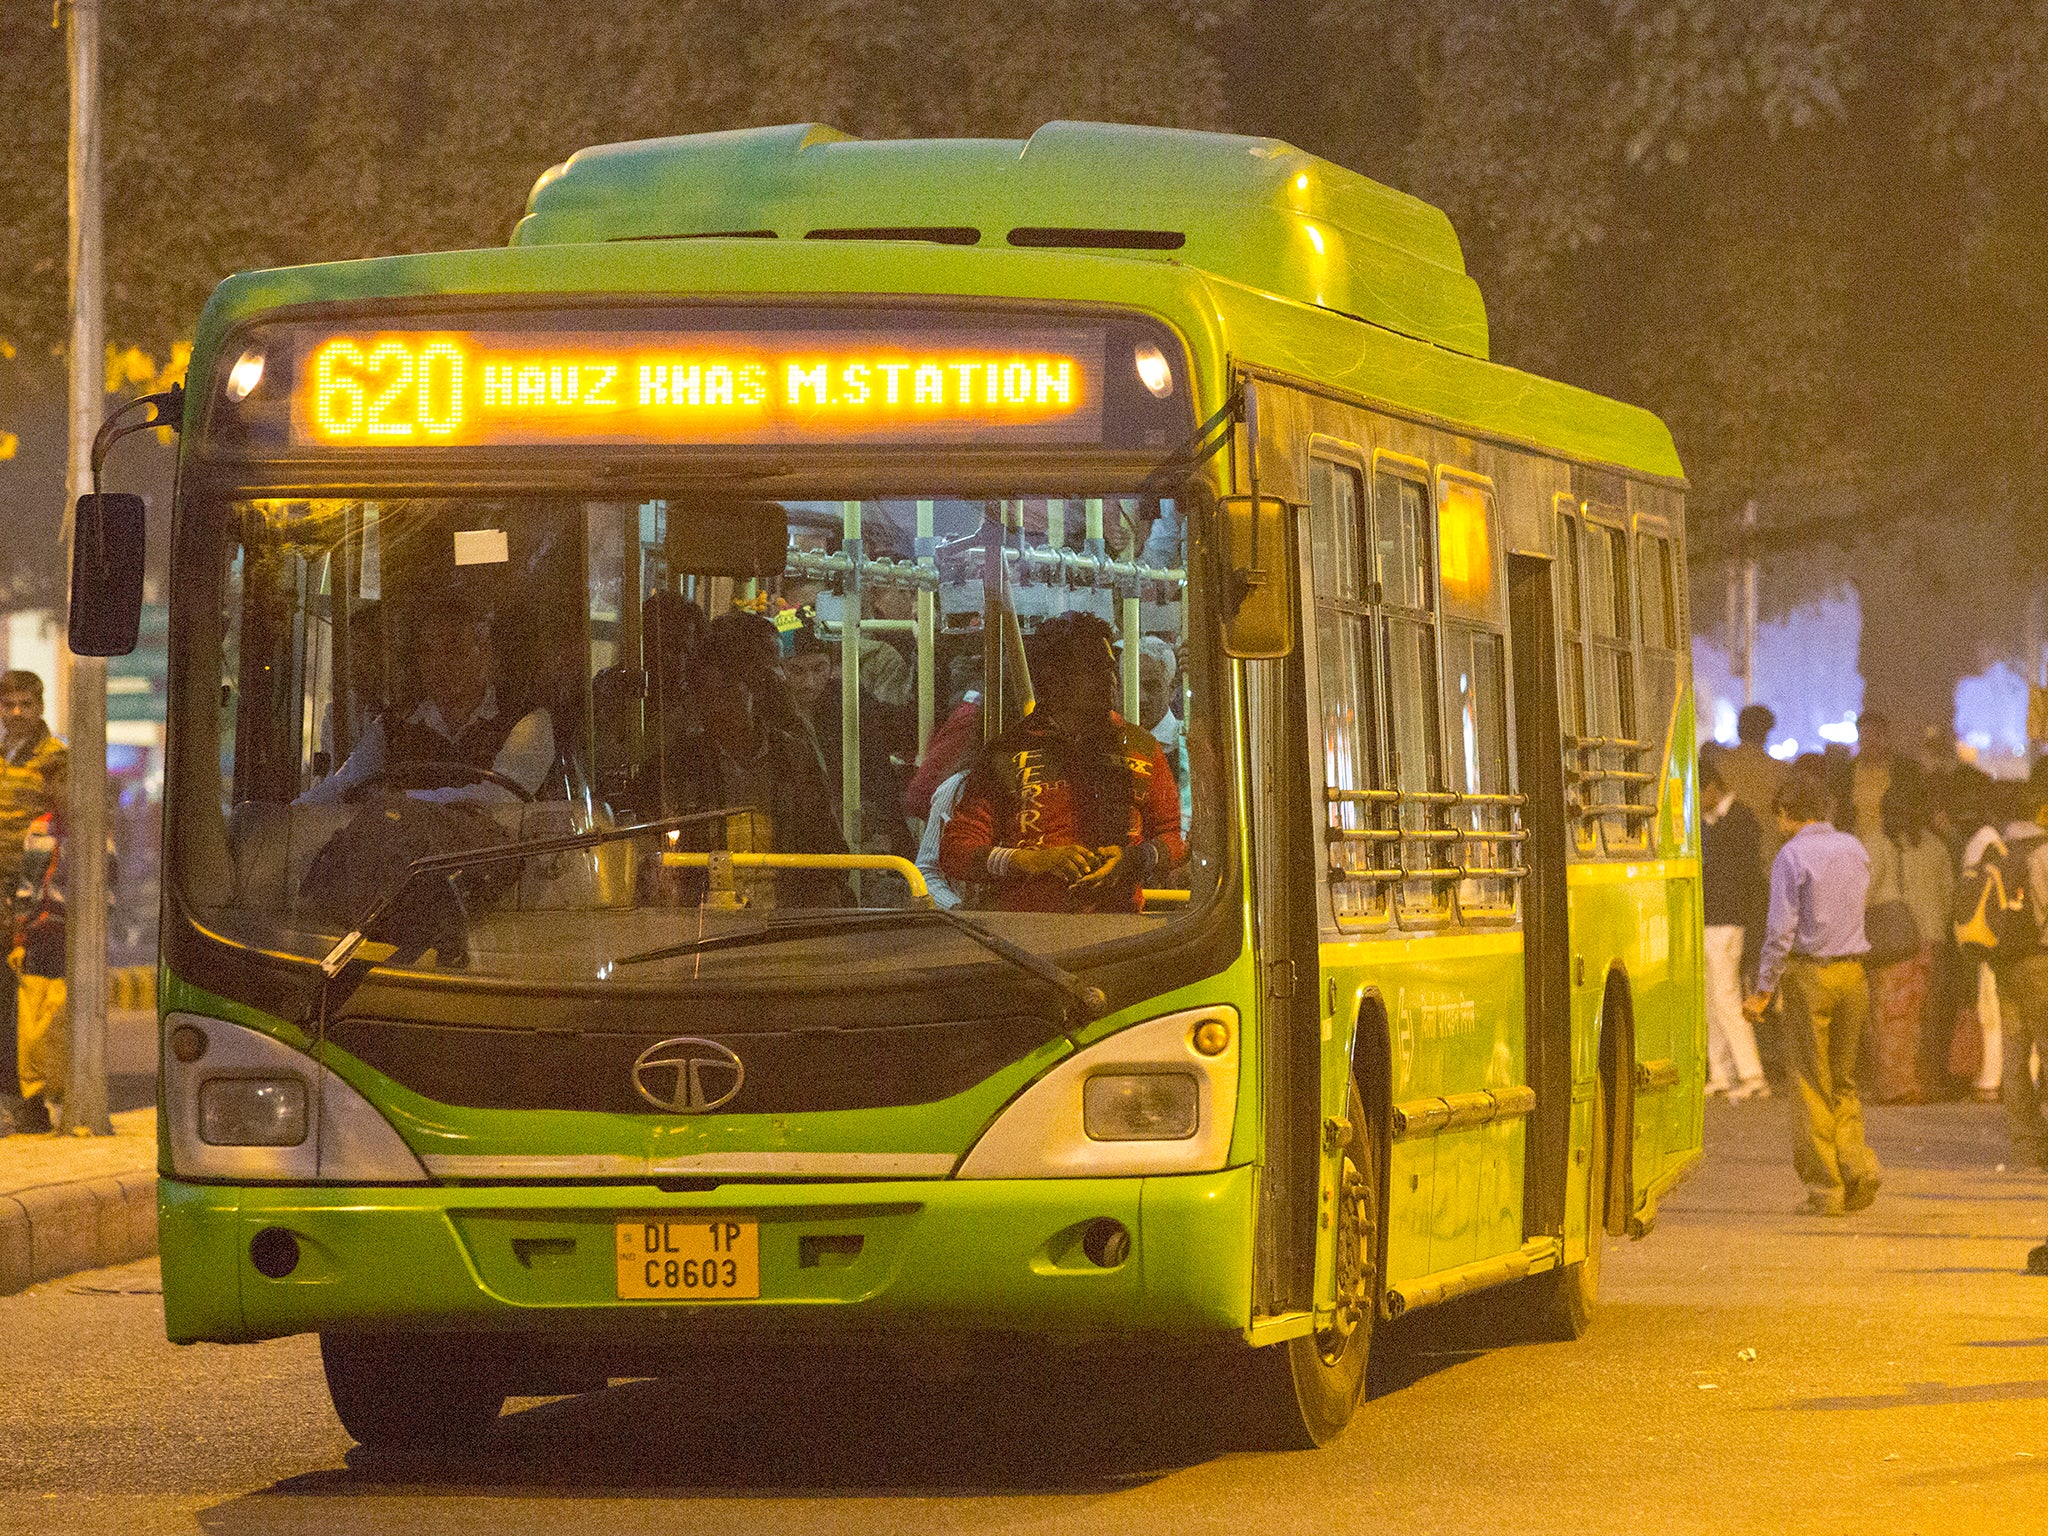 All buses currently in circulation in India will have to be remodelled with the new safety measures